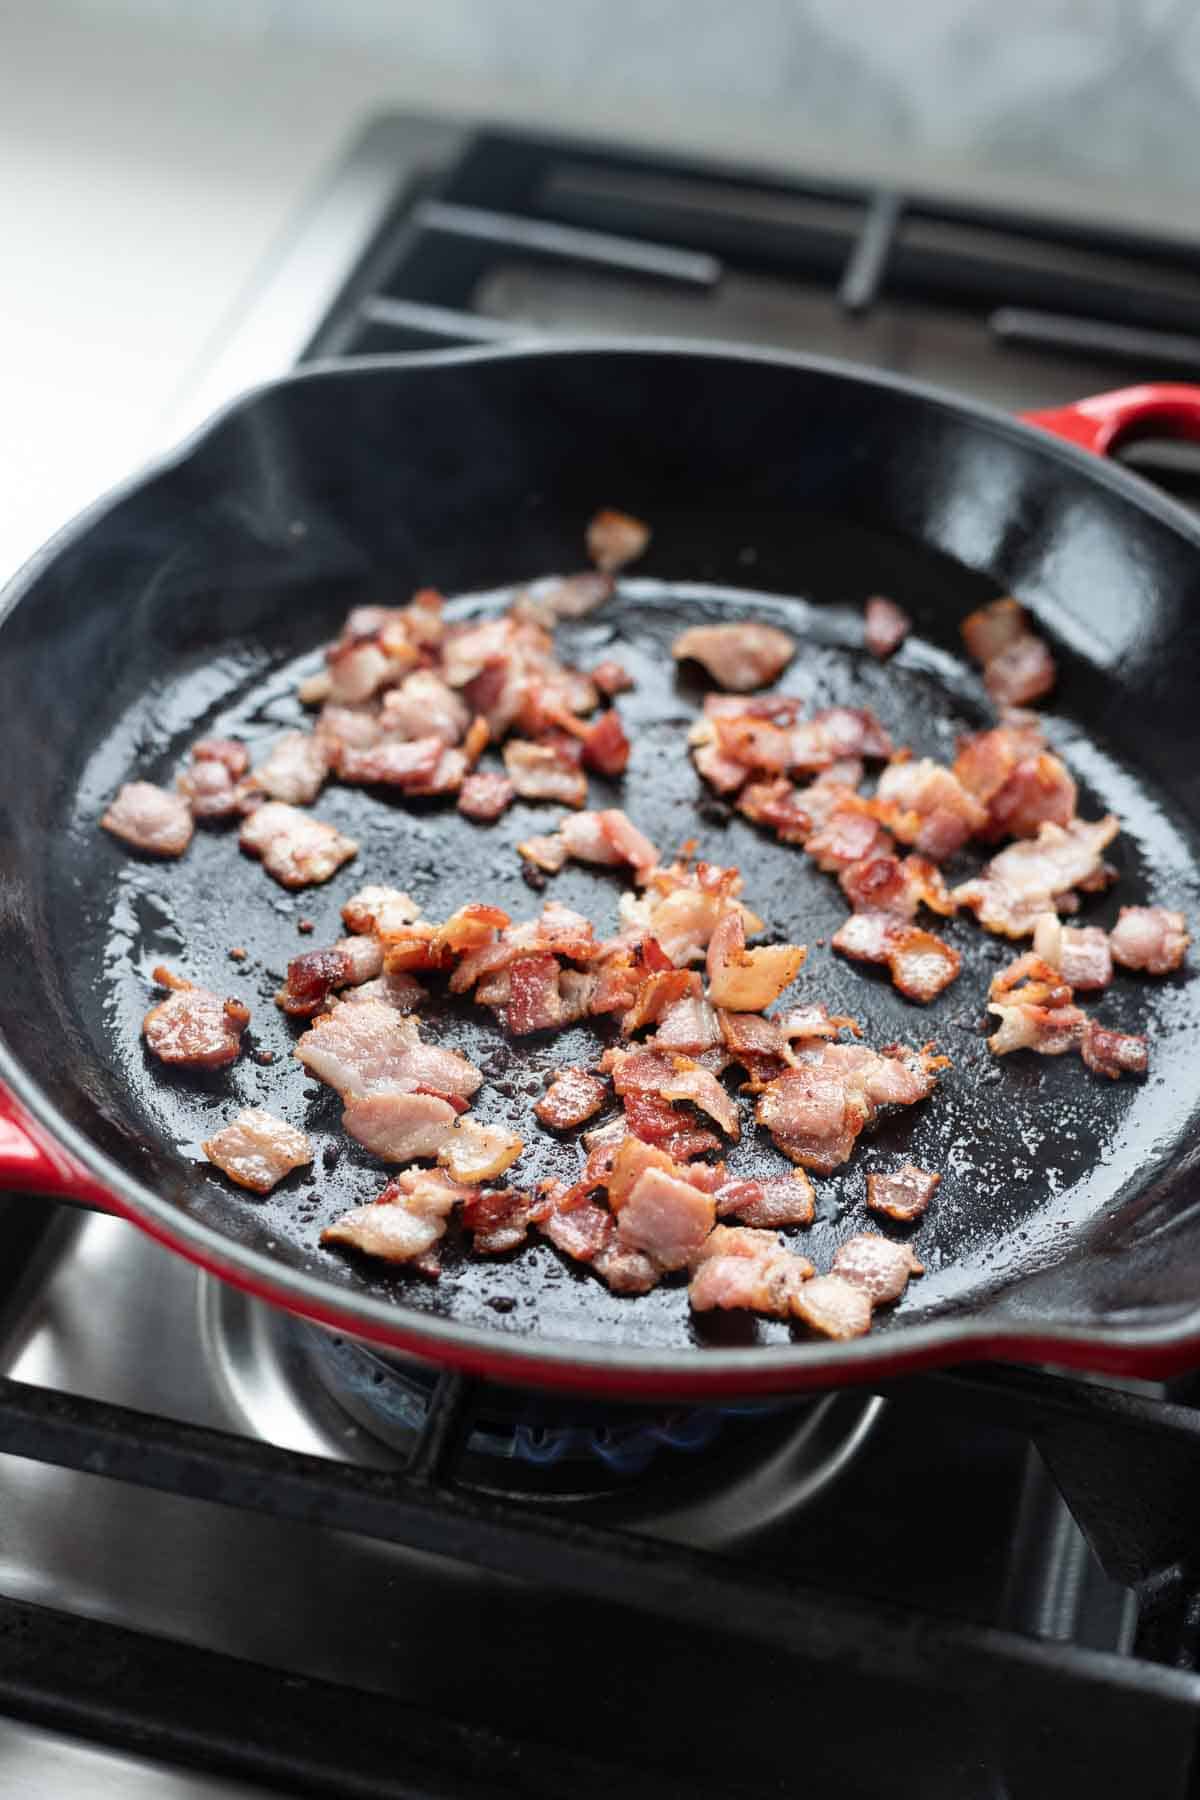 Bacon bits cooking in a cast iron skillet.